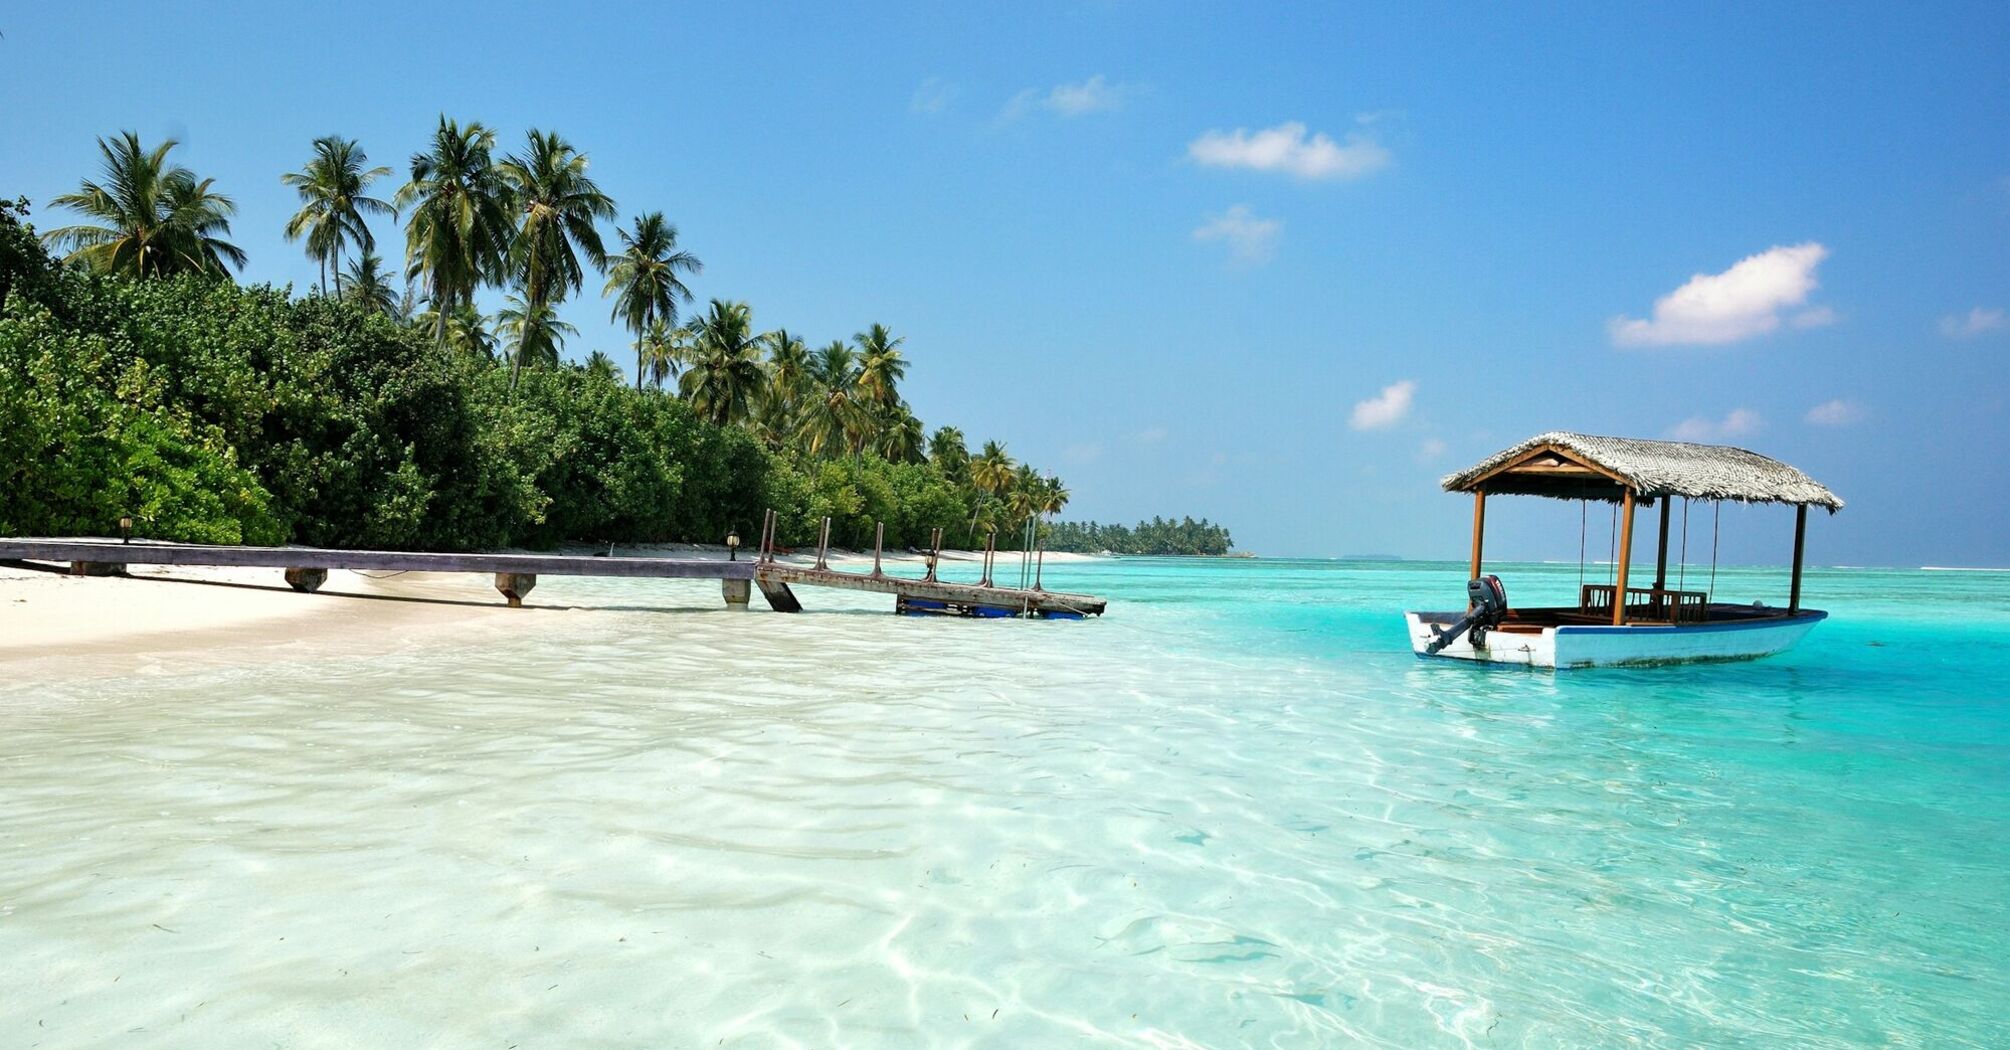 Scenic beach and clear waters in the Maldives